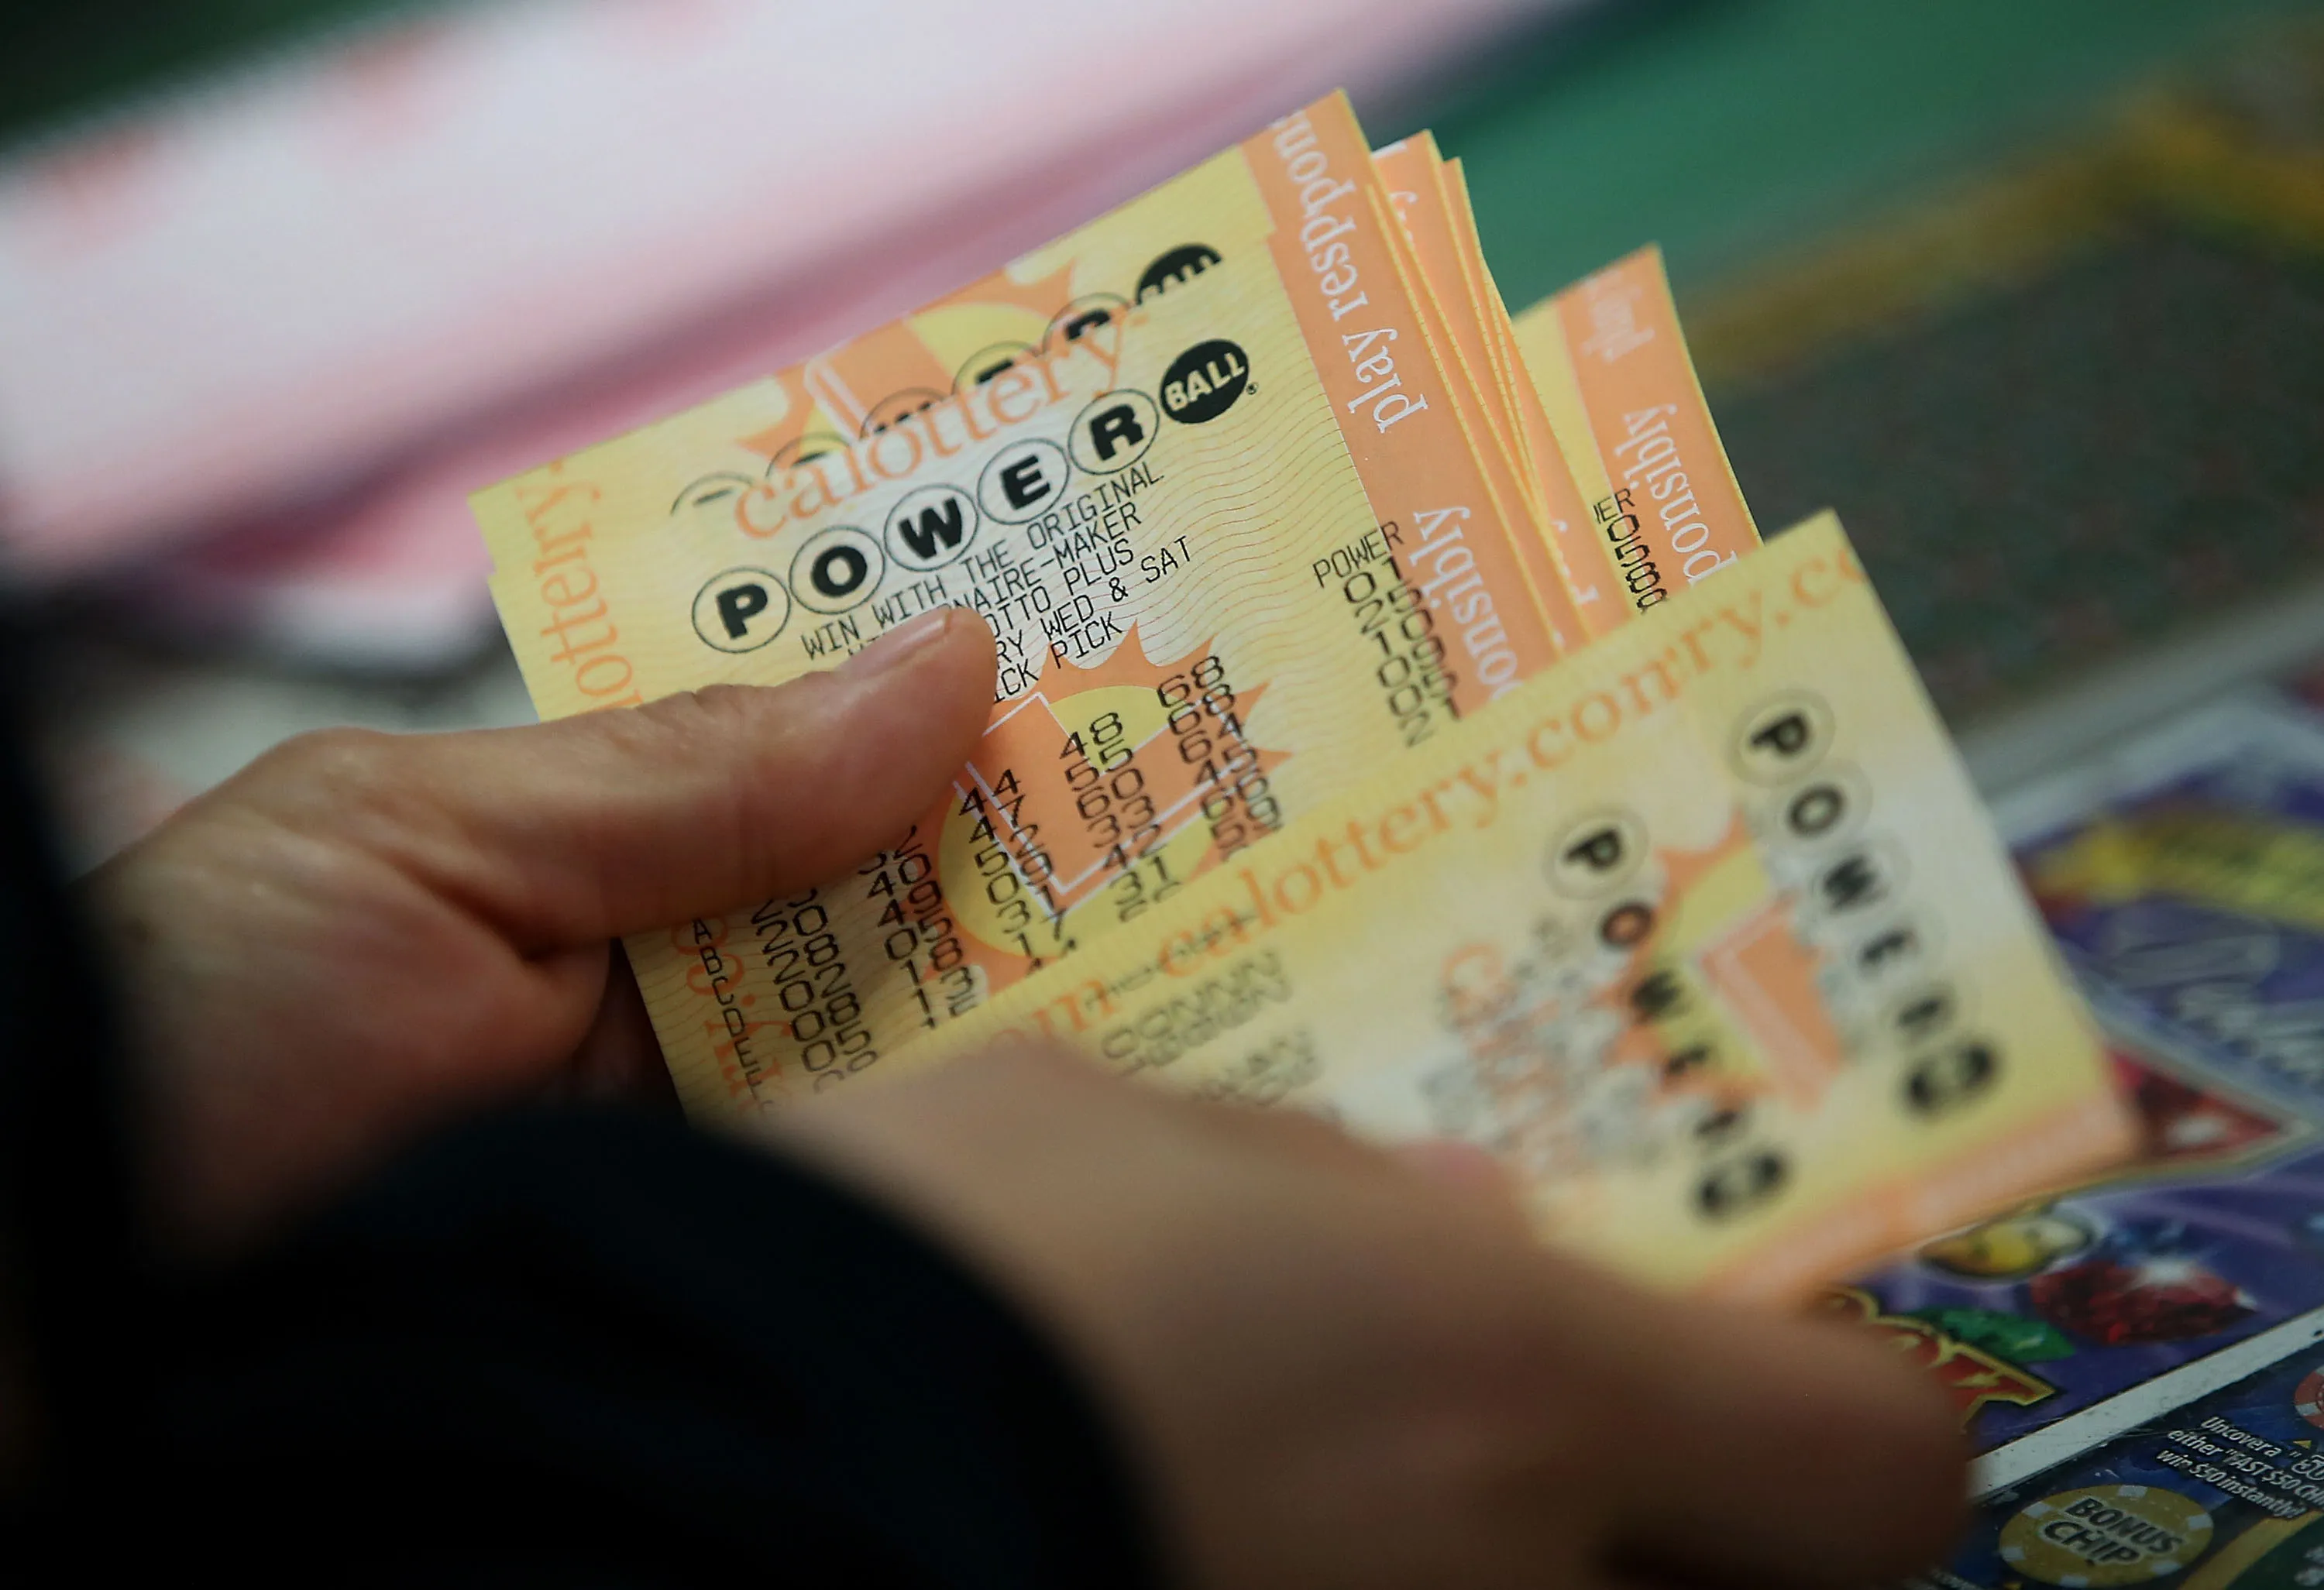 The Next Powerball Winner Could Keep an Extra $7 Million Thanks to the New Tax Law